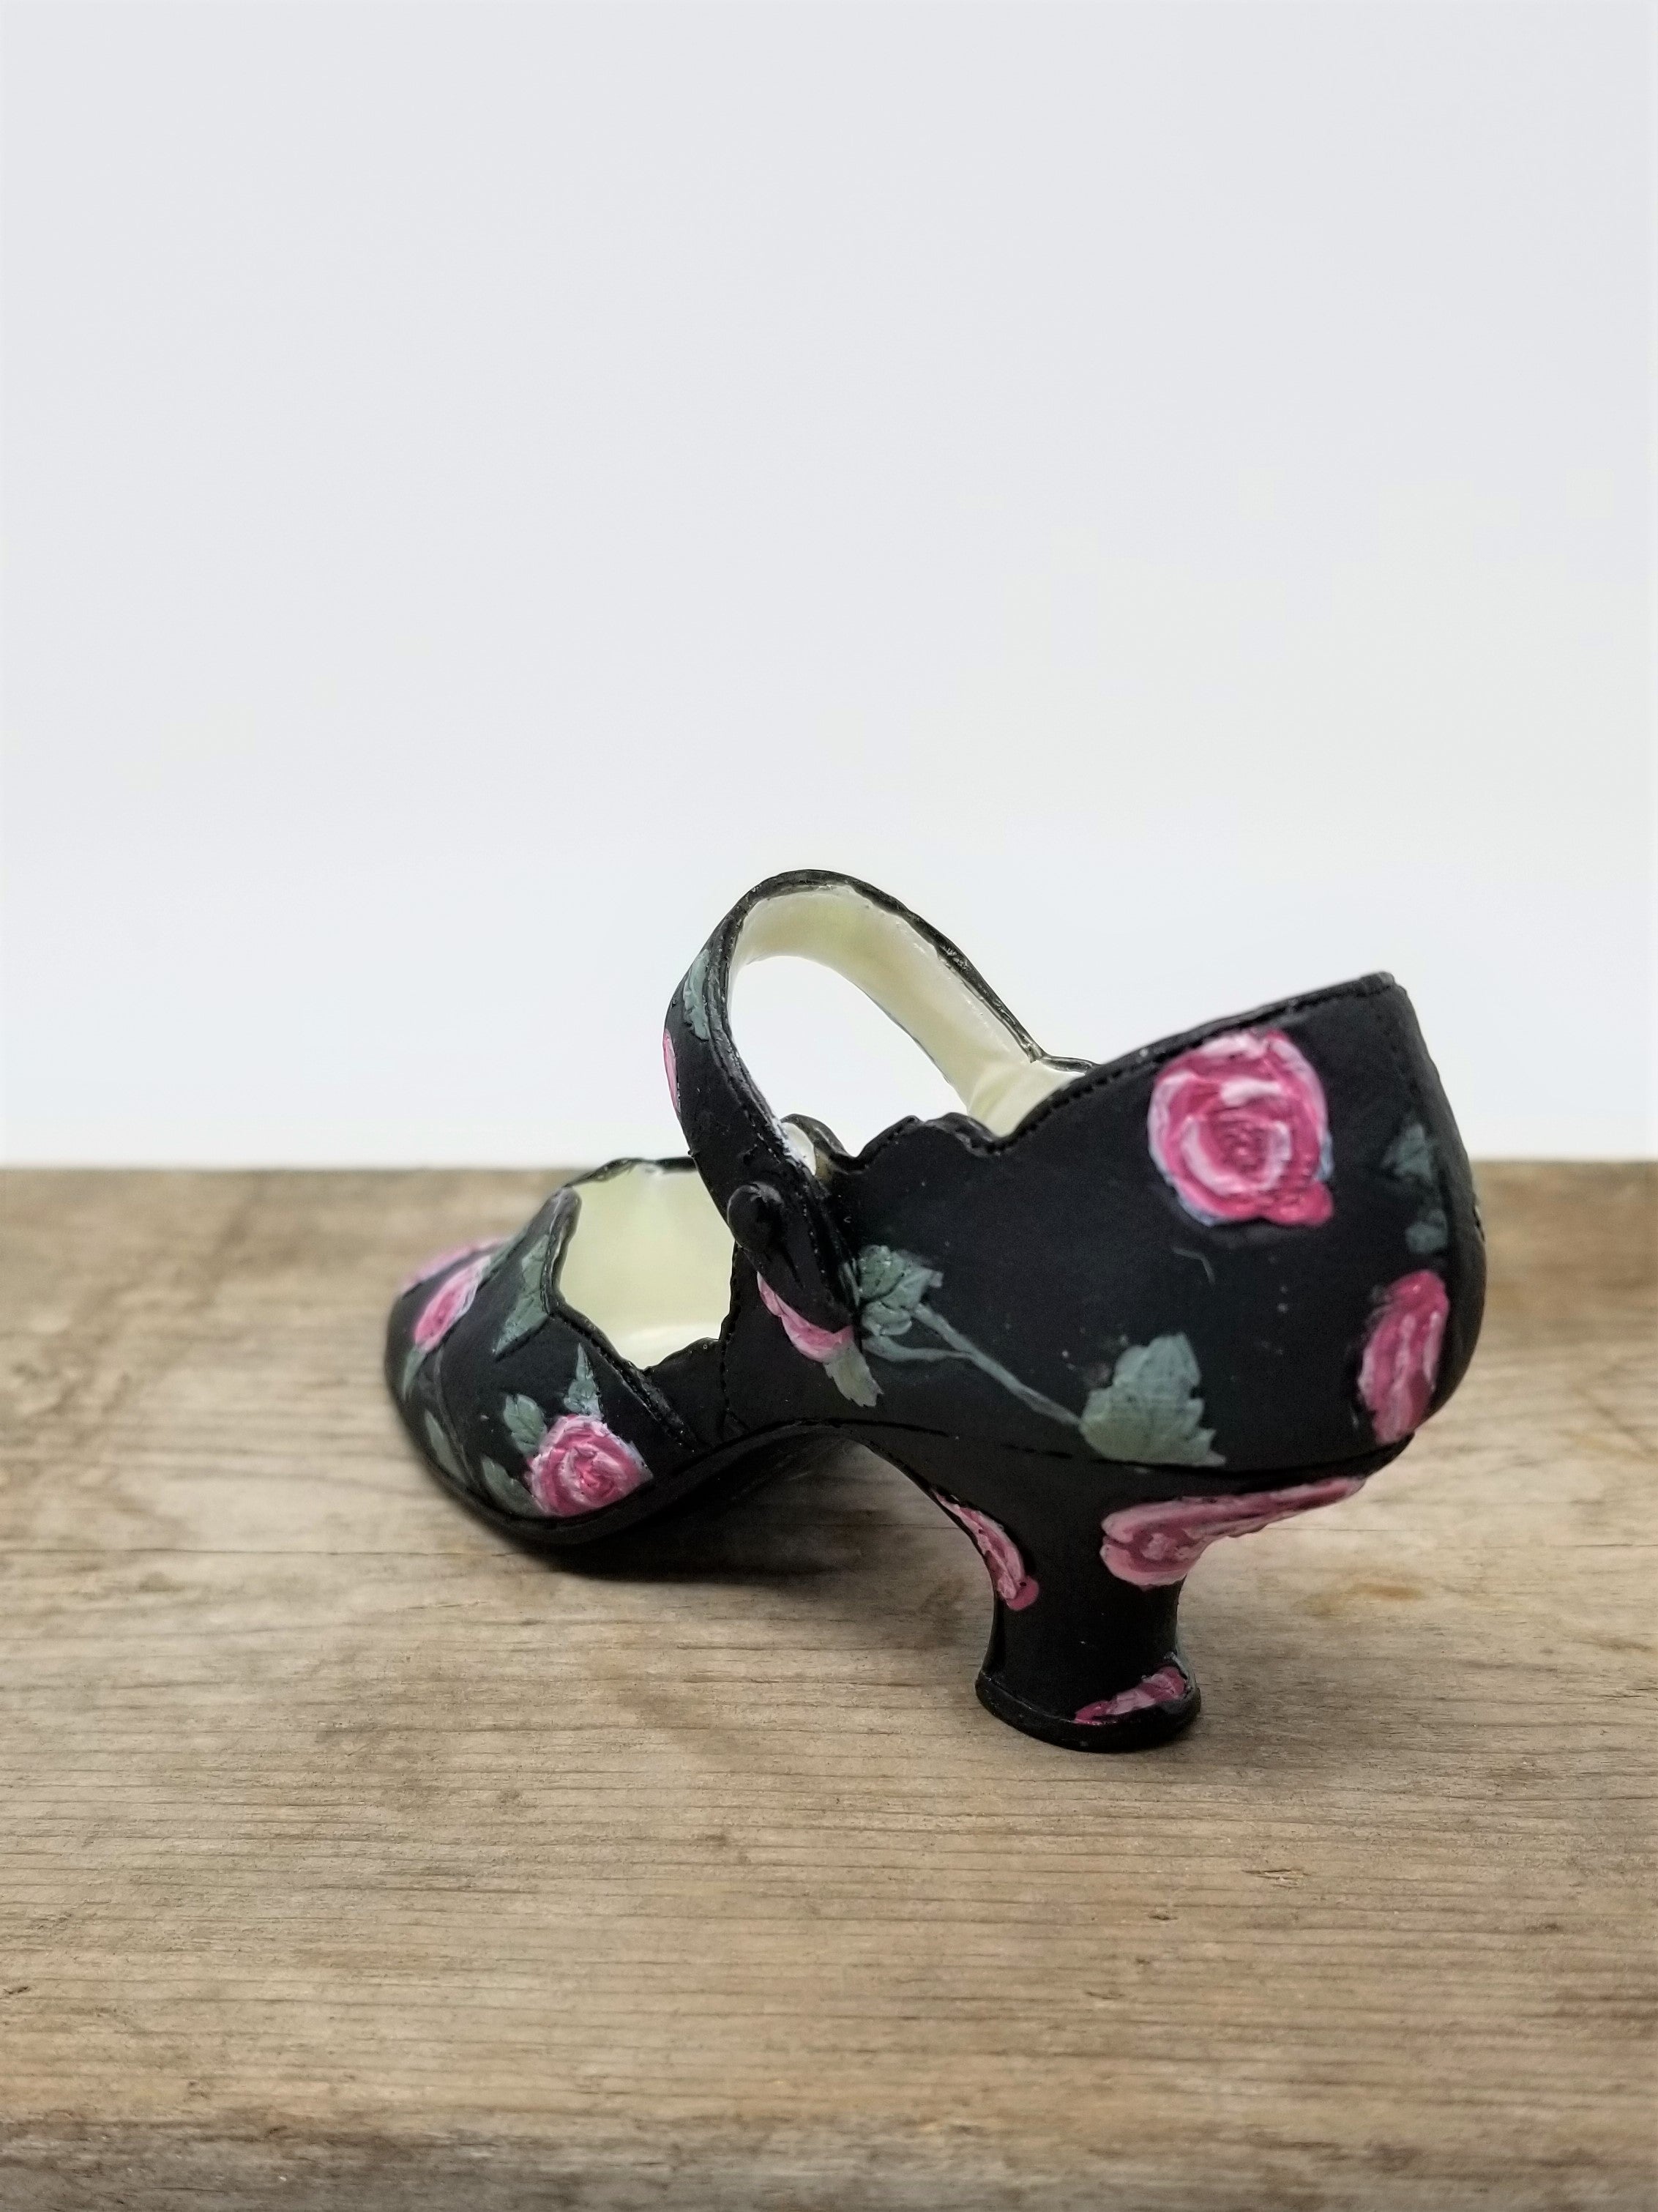 Miniature Shoe with Pink Flowers Black Pumps